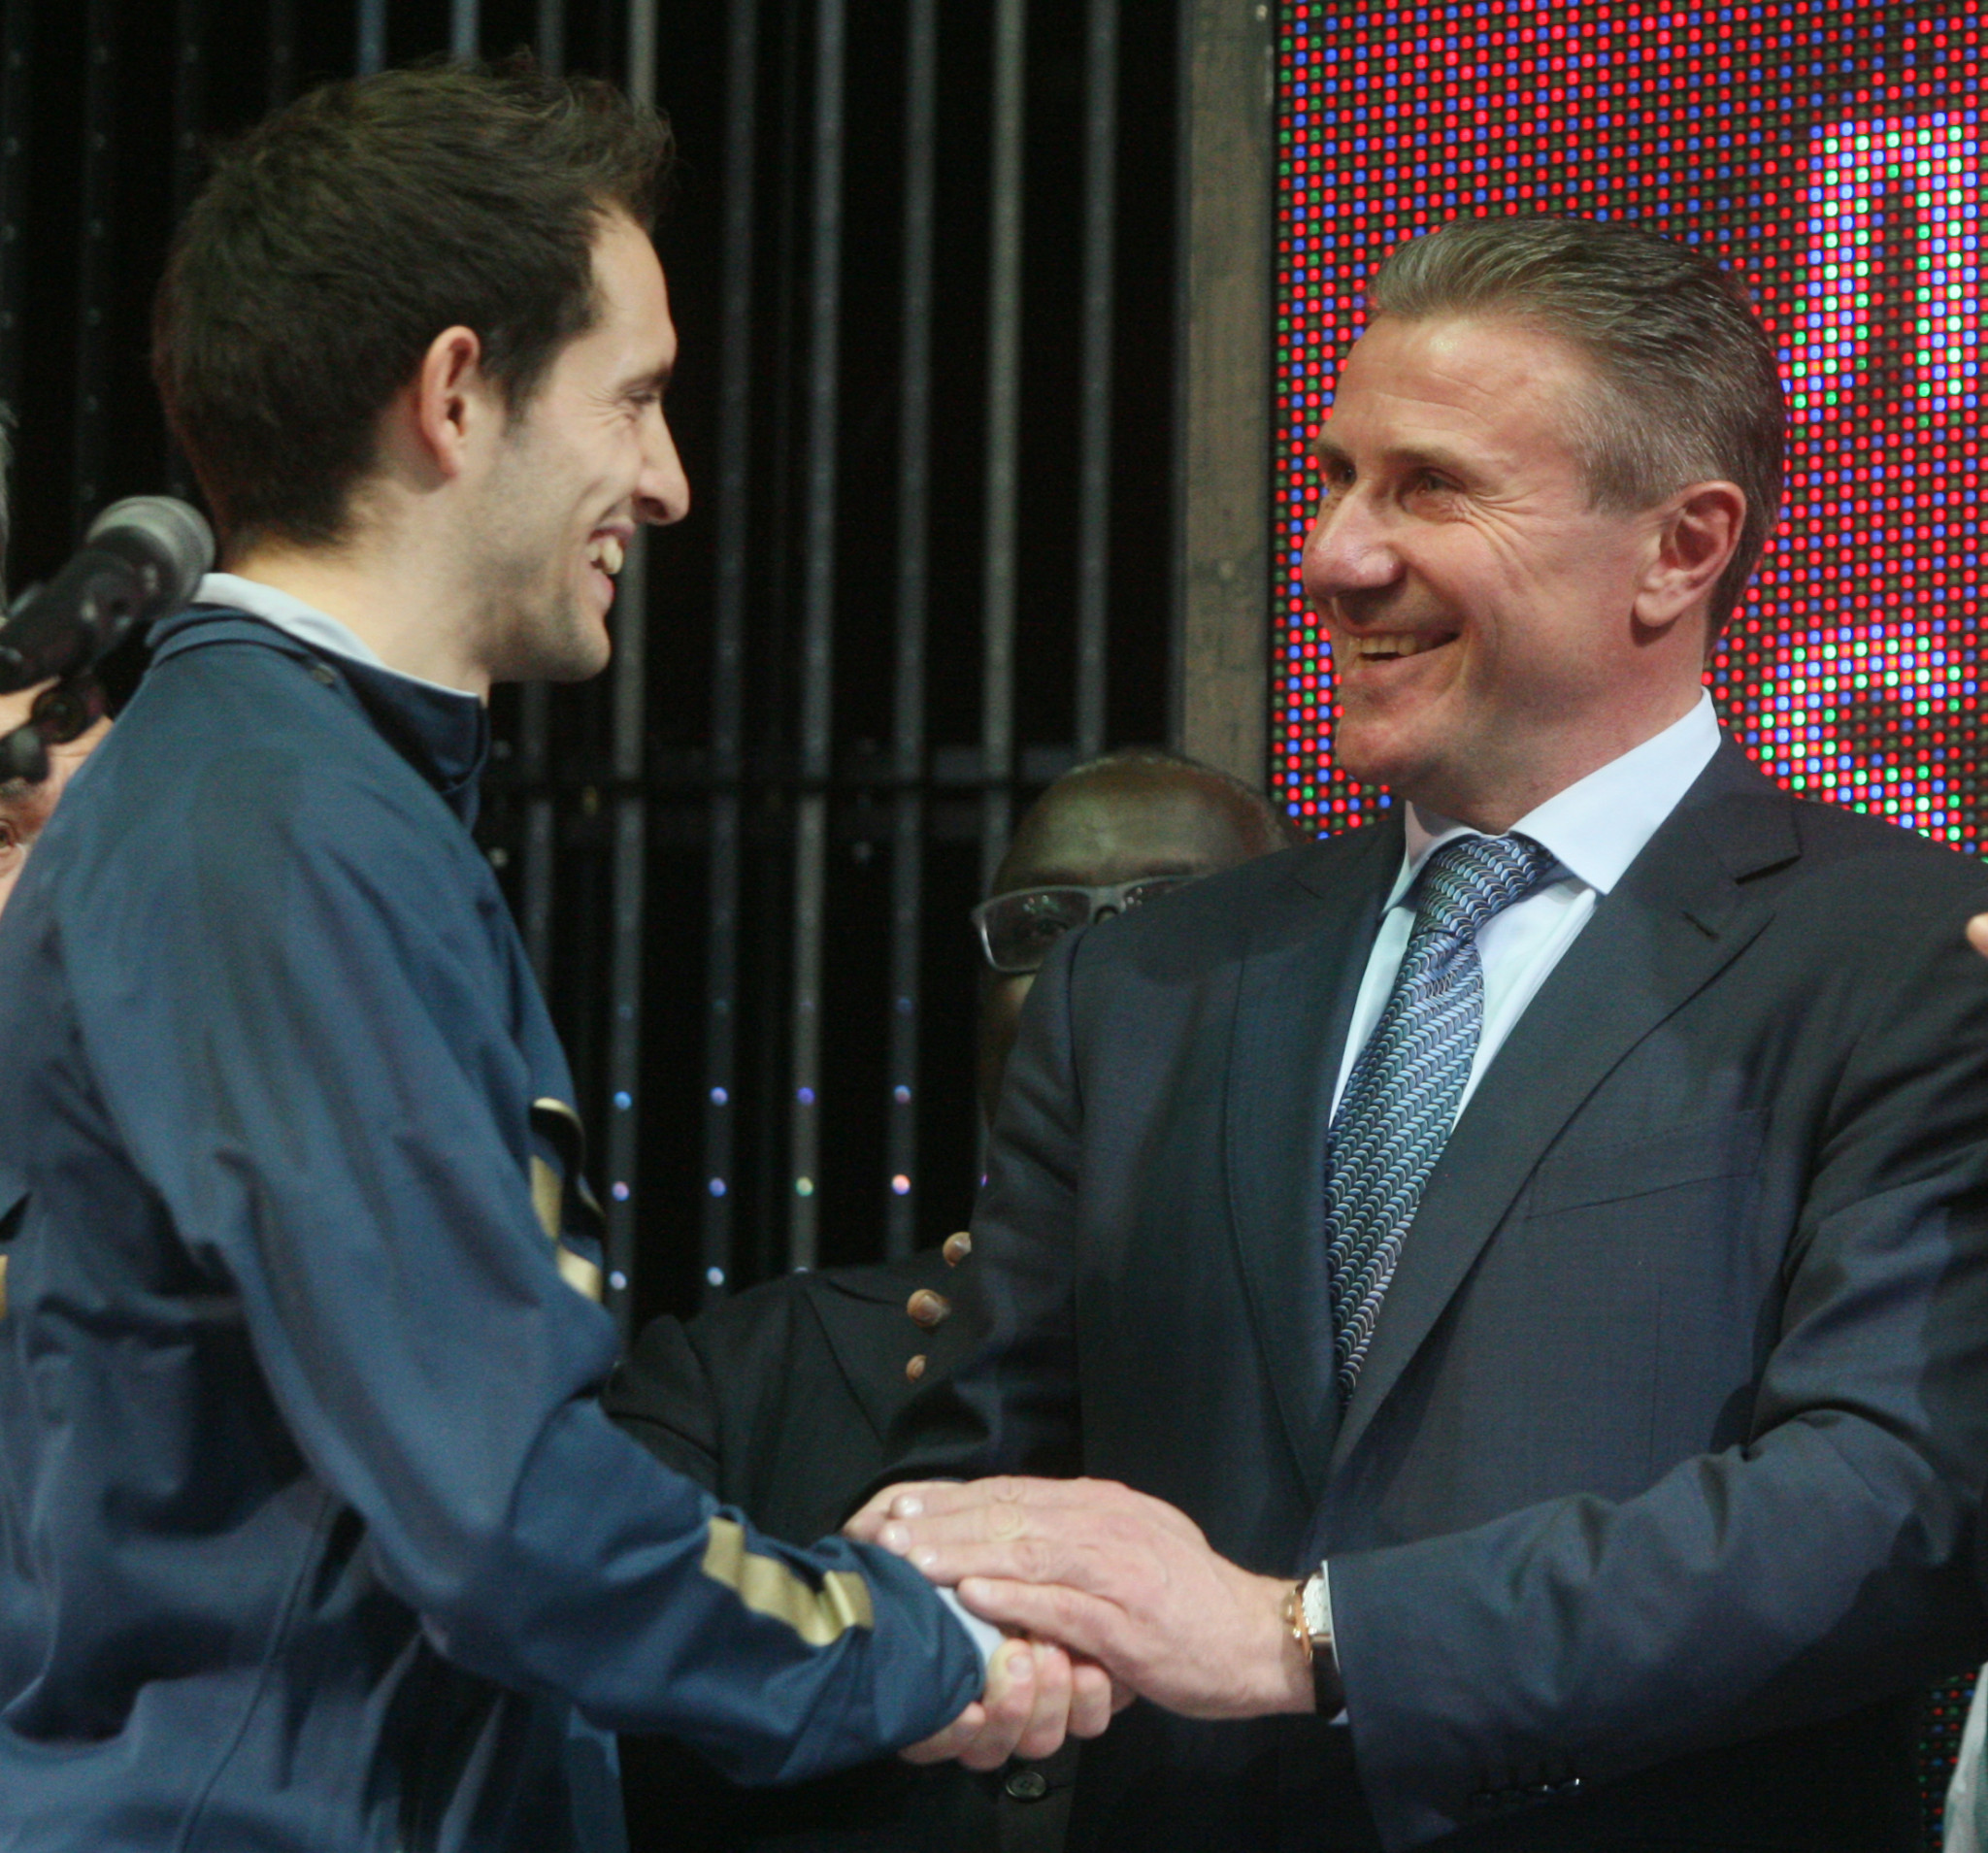 Sergey Bubka congratulates France's Renaud Lavillenie after he broke his 21-year-old world record at the Pole Vault Stars competition in Ukrainian city Donetsk in February 2014 ©Getty Images